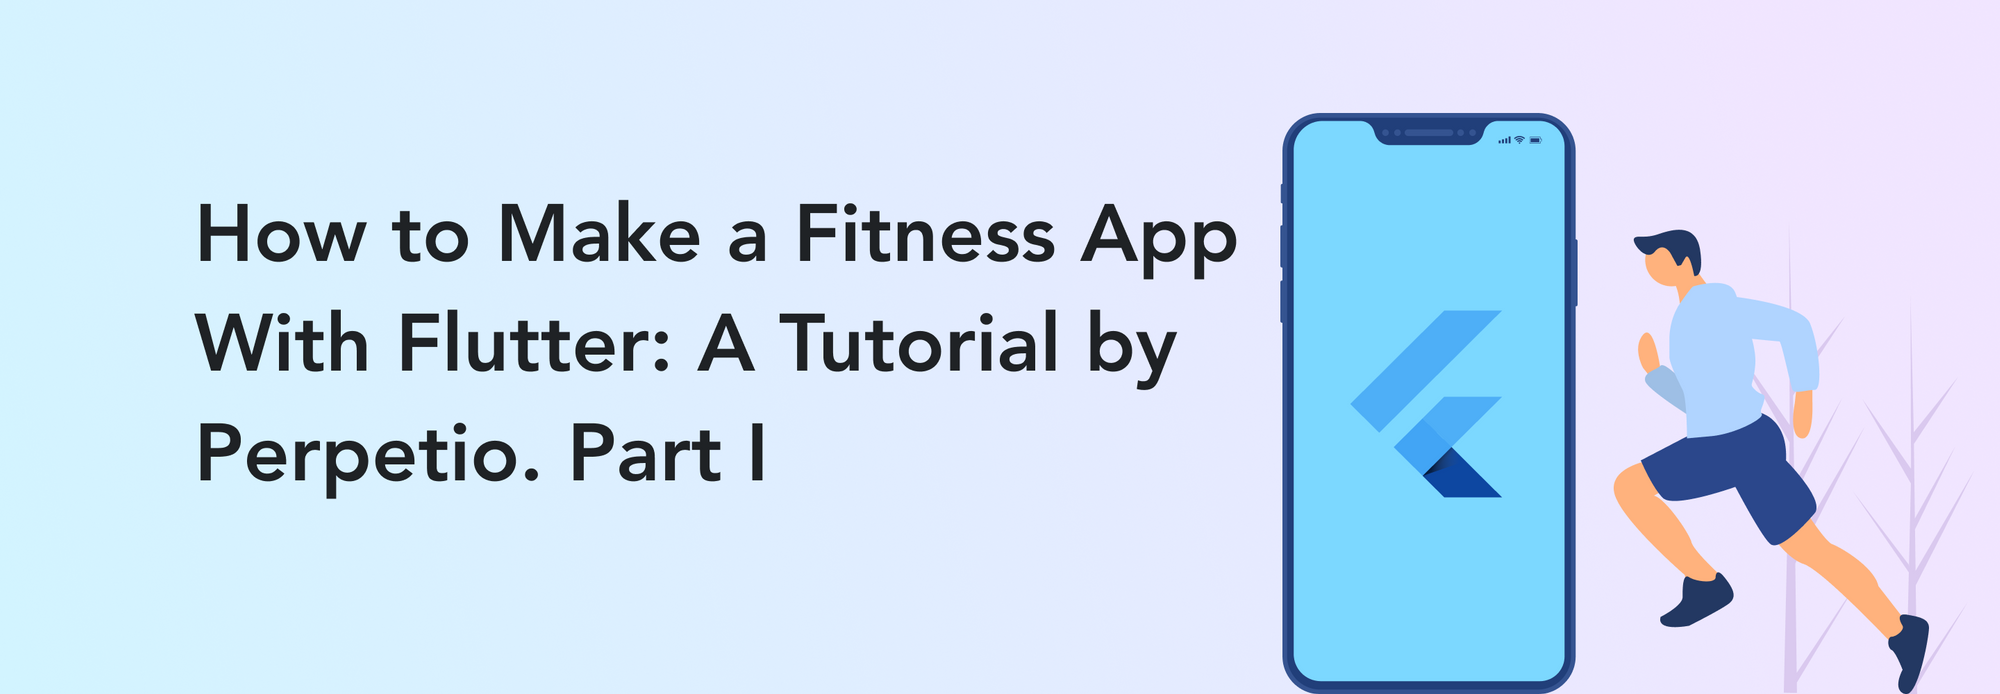 Romantik Kænguru Nybegynder How to Make a Fitness App With Flutter: A Tutorial by Perpetio. Part I